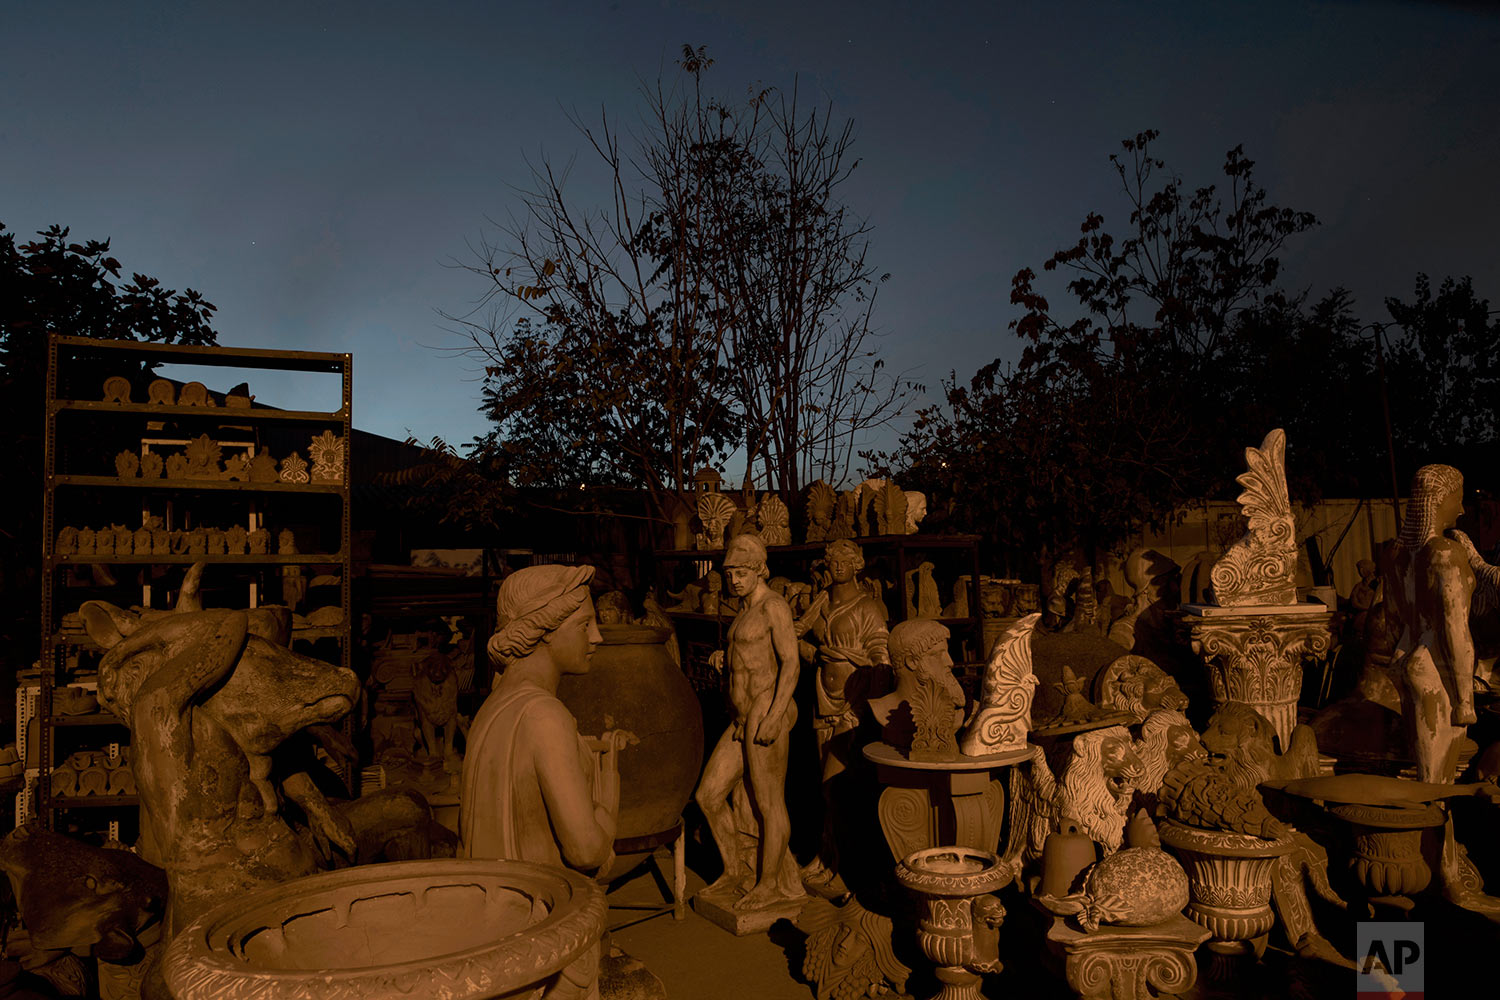  In this Friday, Nov. 20, 2017 photo, the terracotta statue of Ares, the ancient Greek god of war, middle, stands among other statues, busts, antefixes and flowers pots in the yard of Haralambos Goumas' sculpture and ceramic workshop, in the Egaleo s